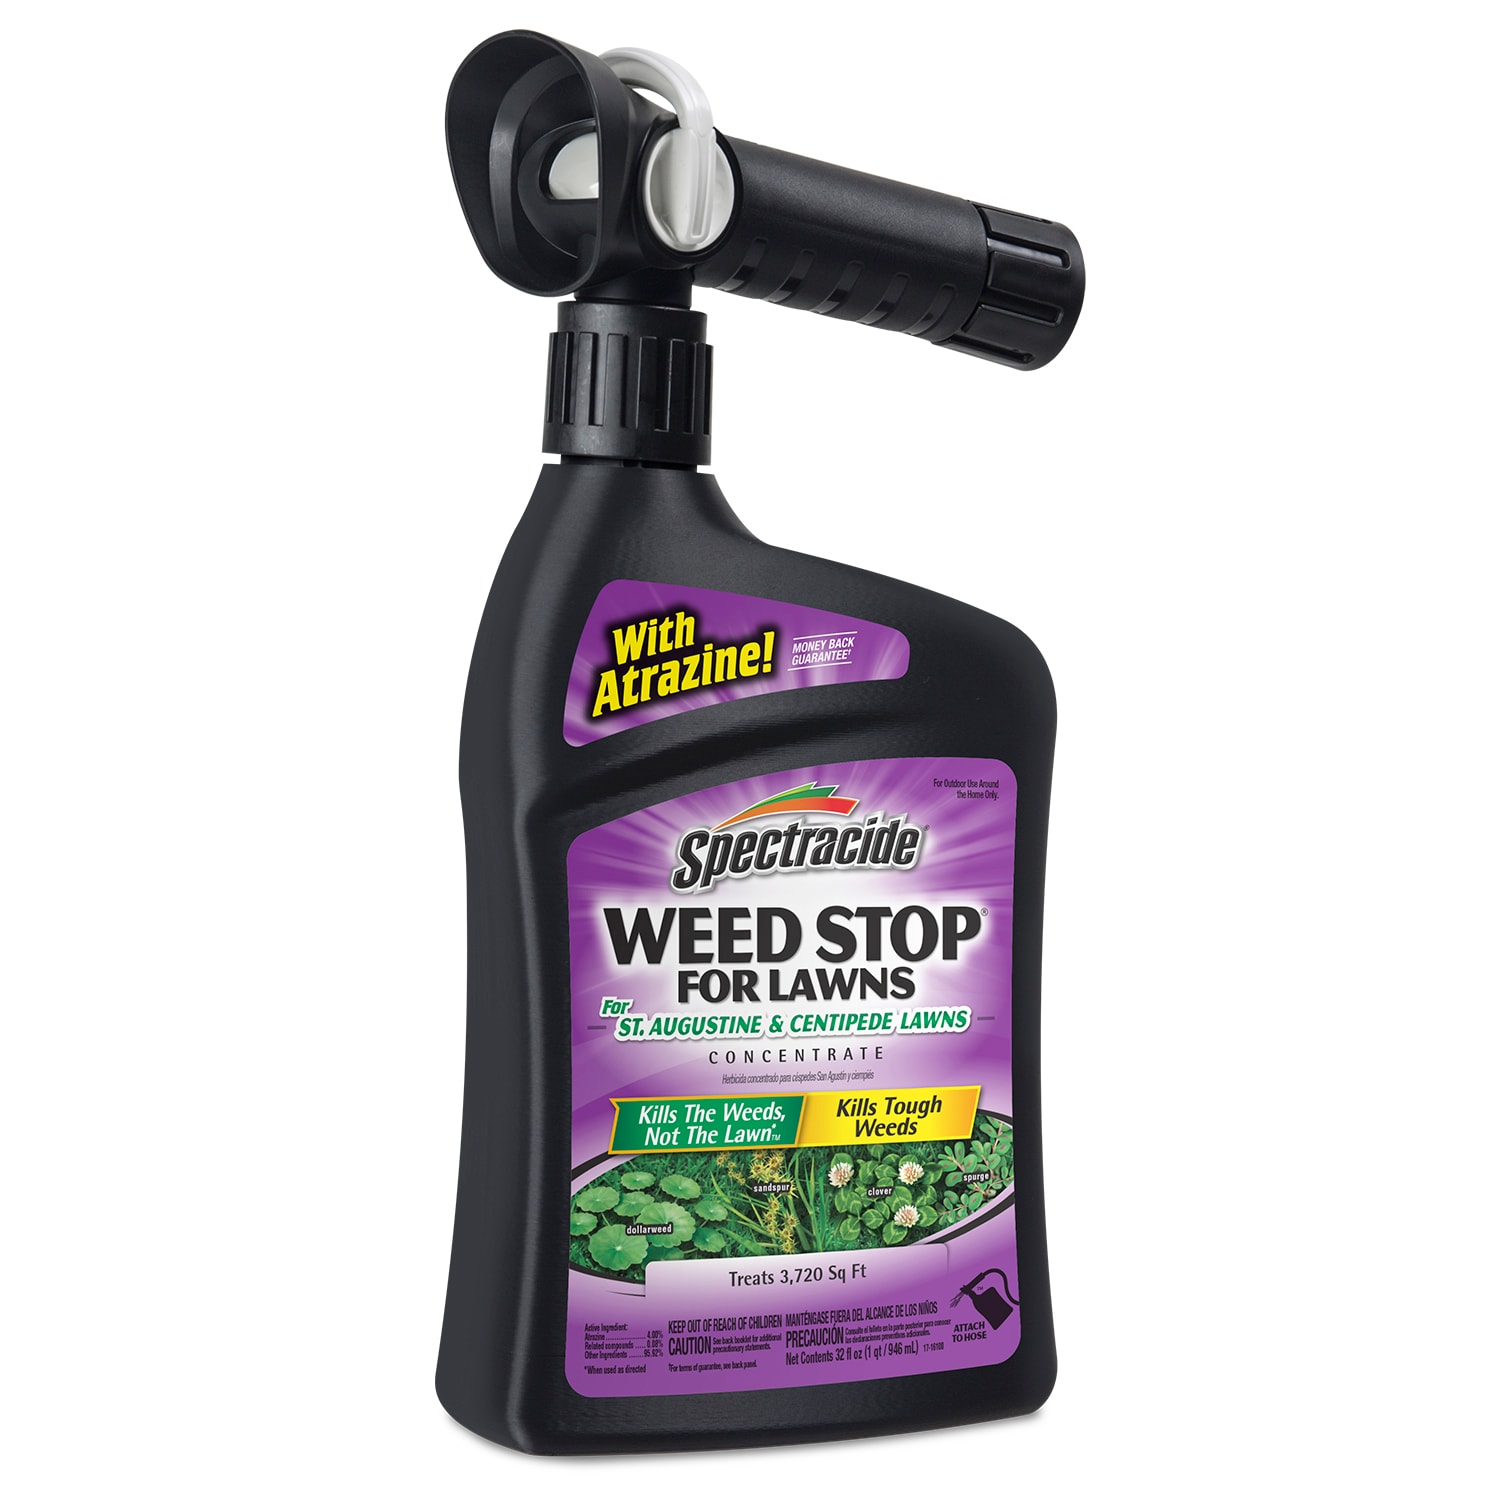 Weed prevention measures, Snow Removal & Cleaning